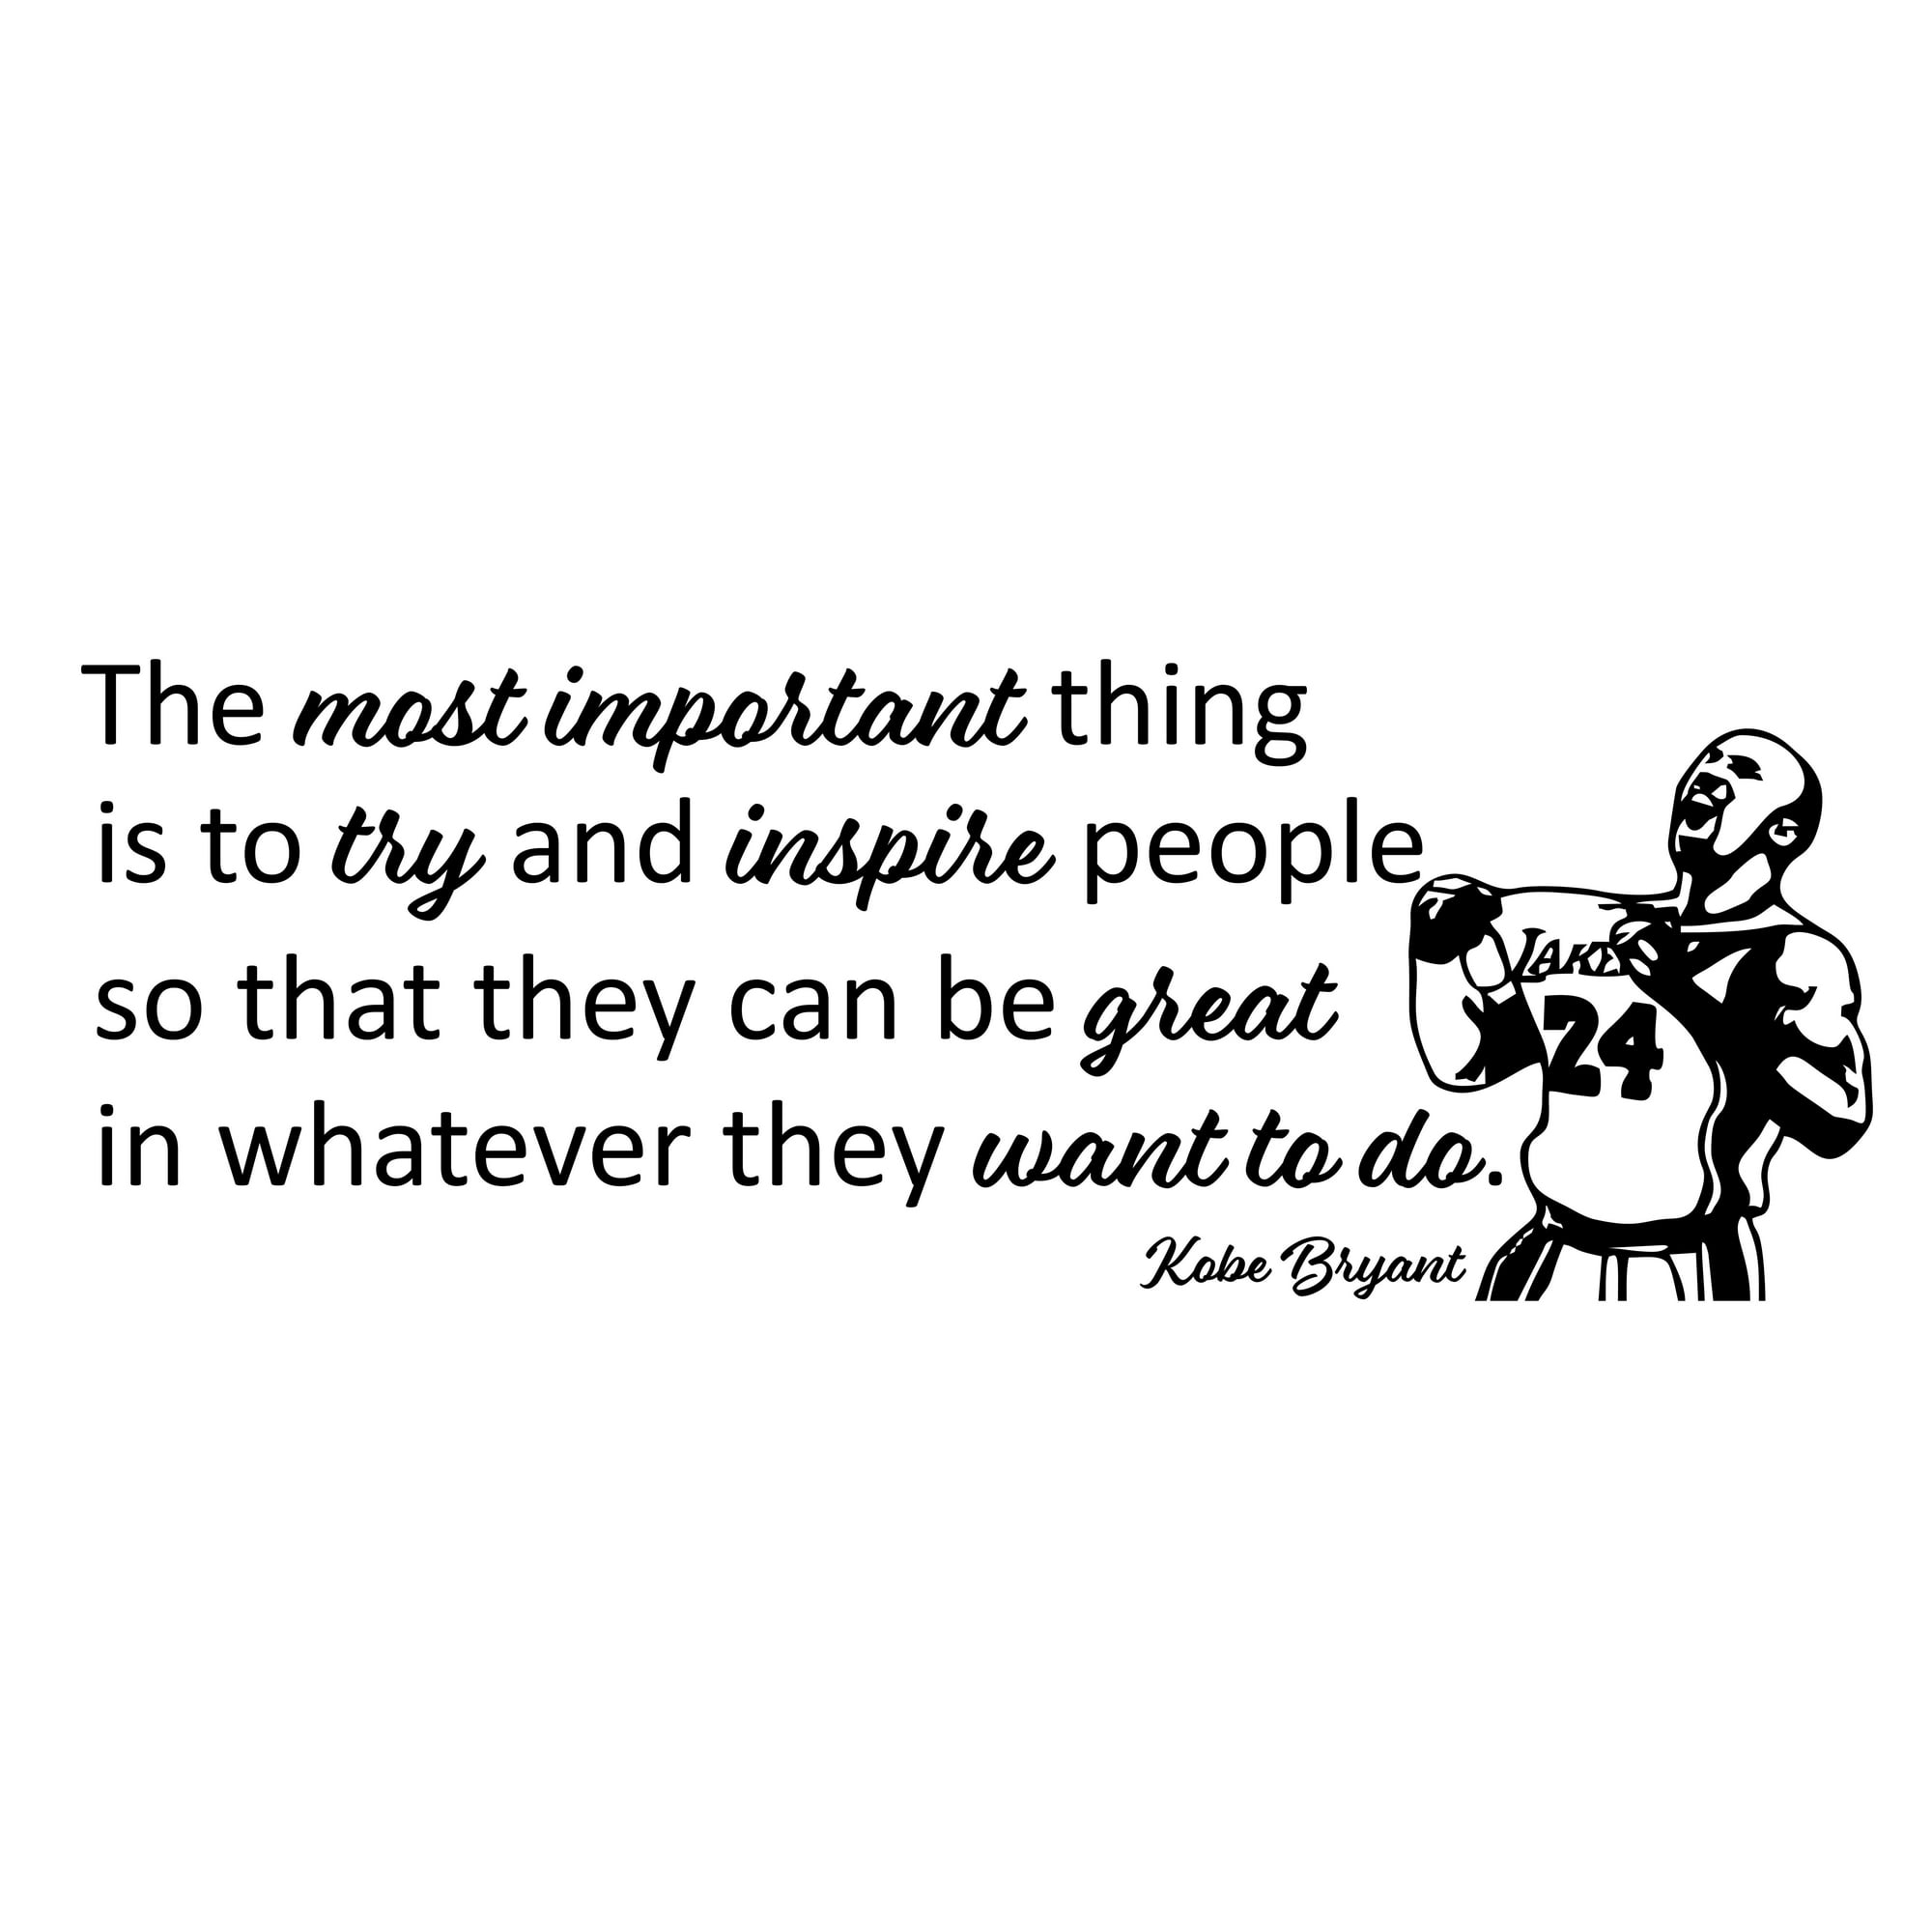 The most important thing is to try and inspire people so that they